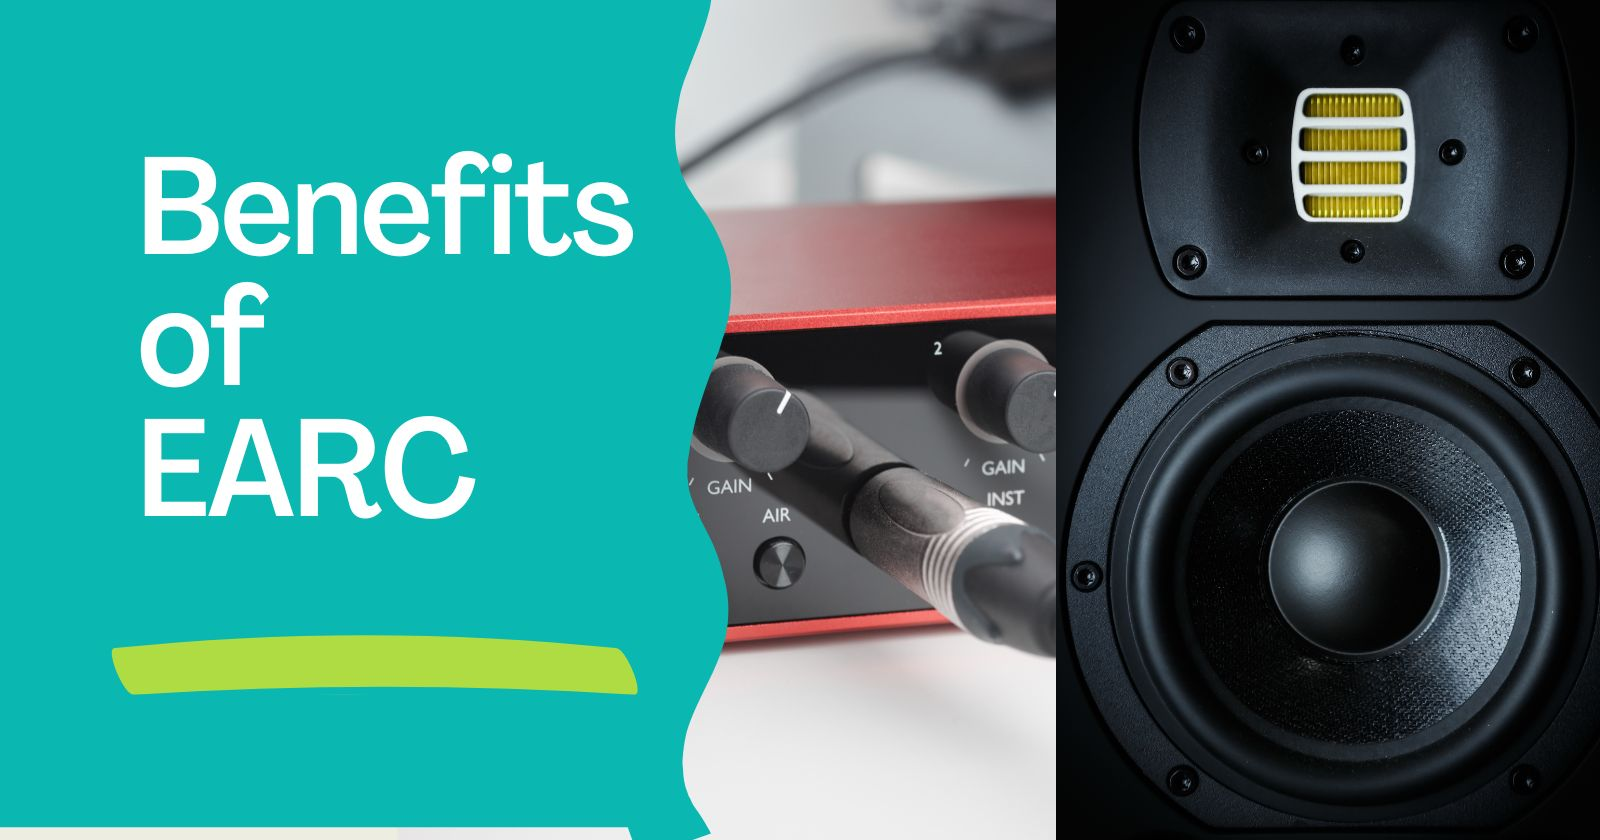 Benefits of EARC: HDMI ARC Cable